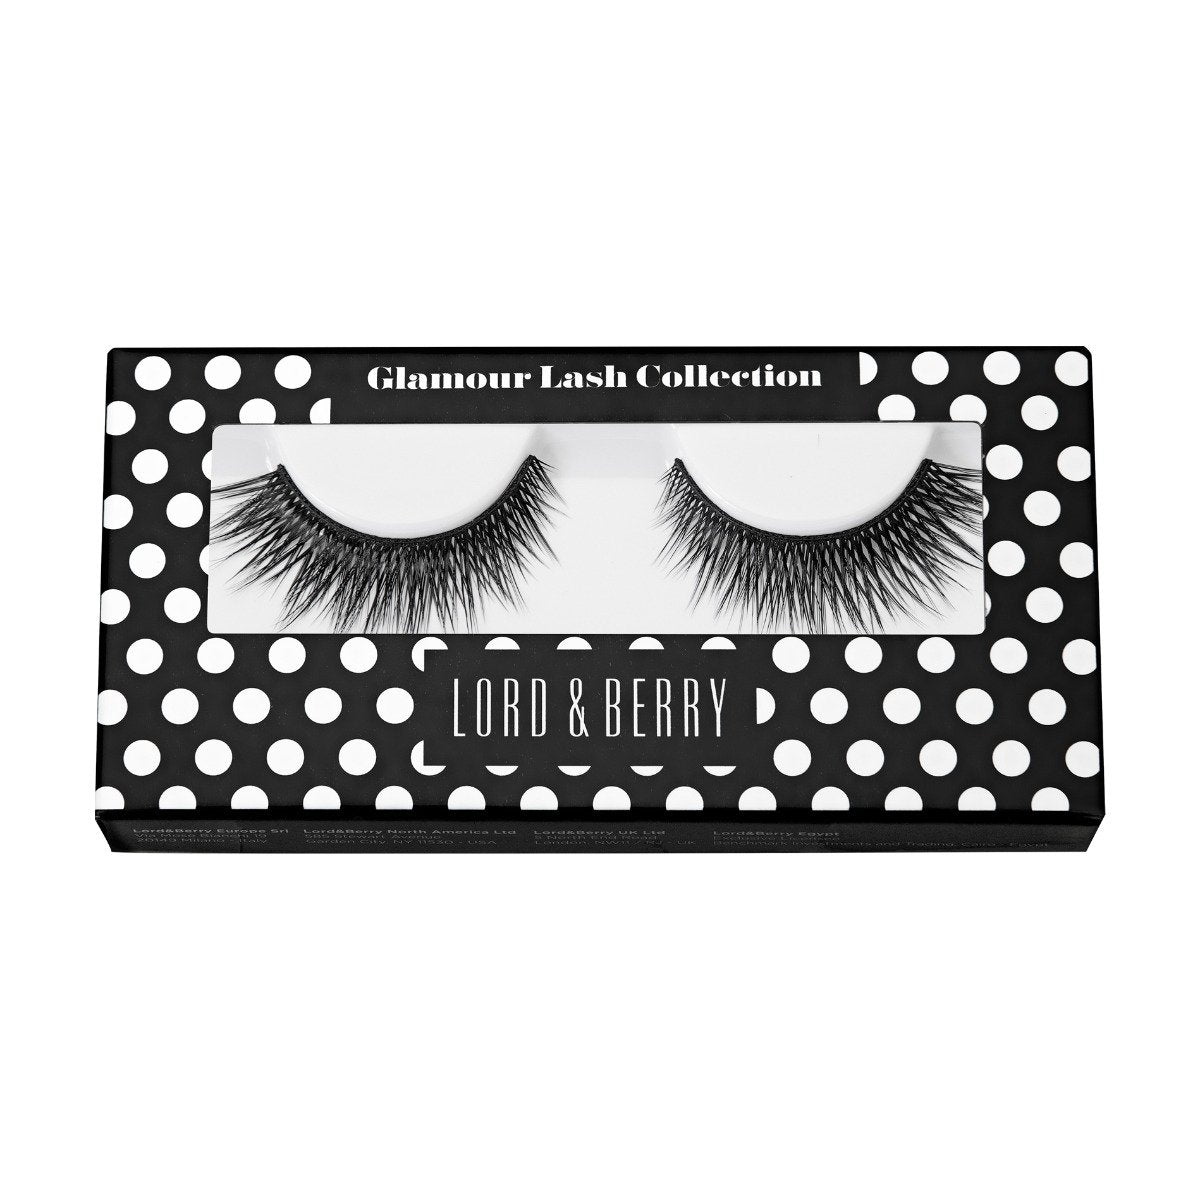 Lord & Berry Eyelashes Glamour Lash Collection - EL11 - Bloom Pharmacy